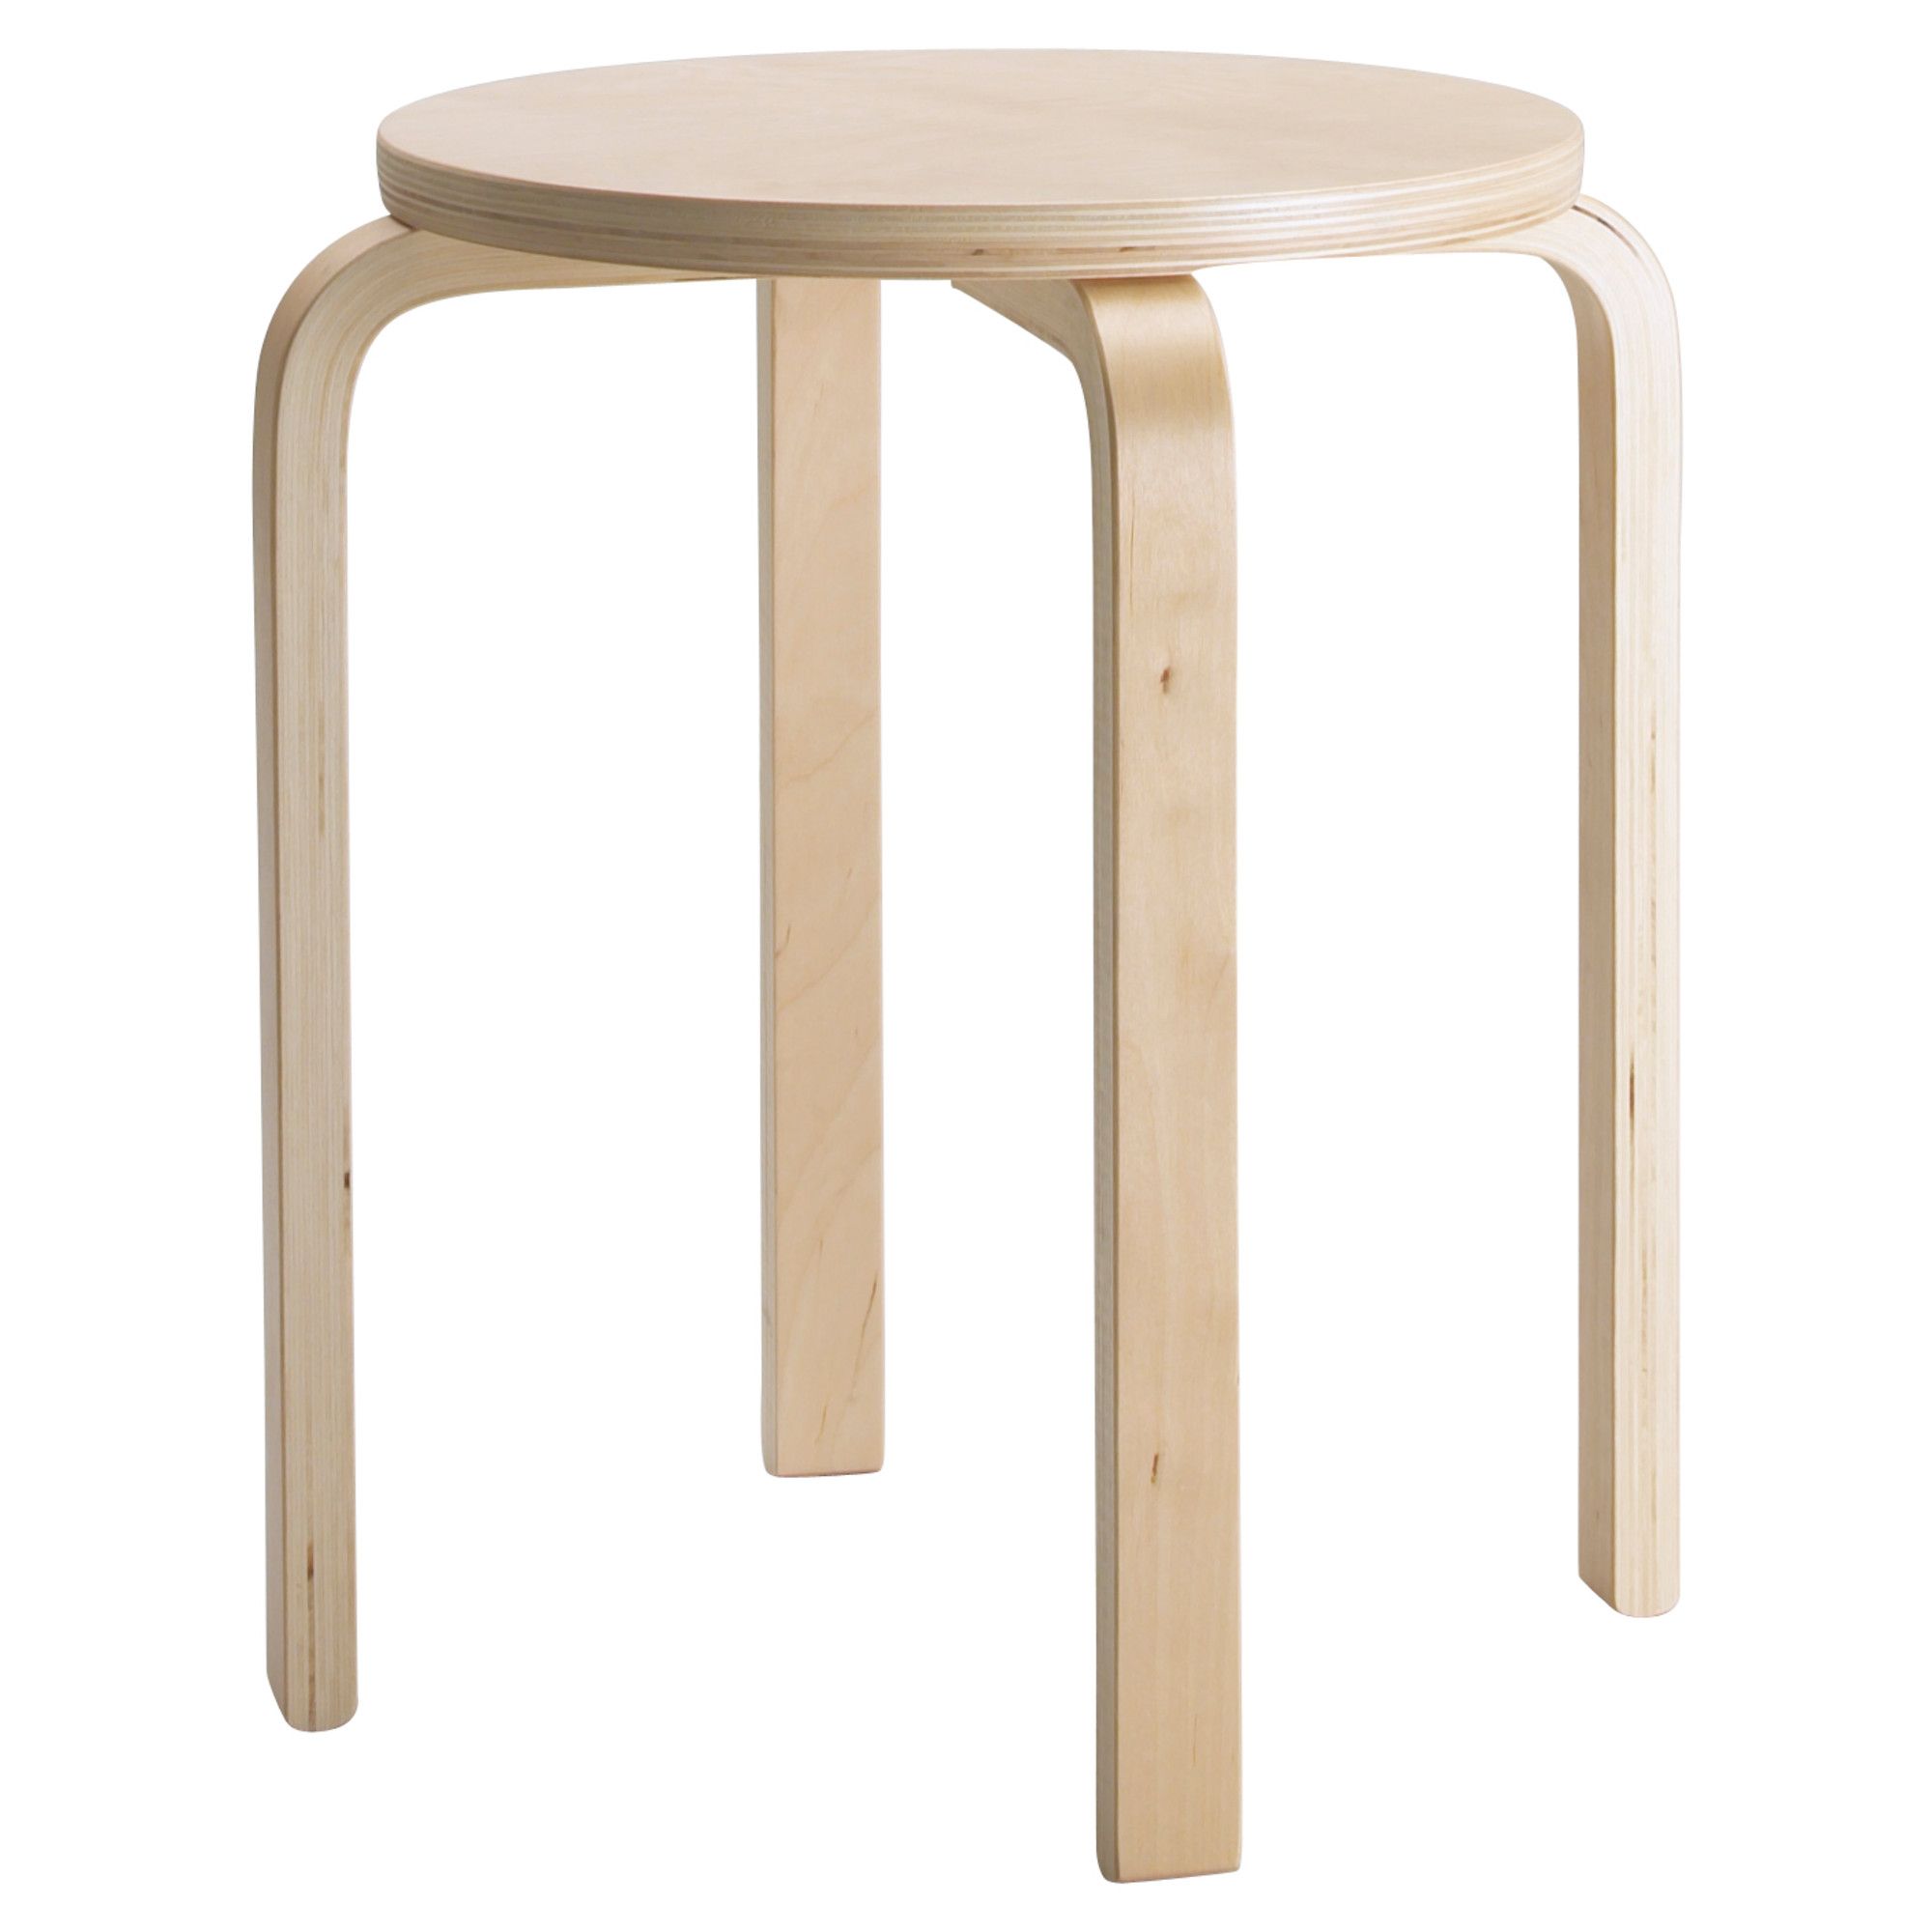 FROSTA Stool, birch plywood | Stools, Plywood and Ikea hack